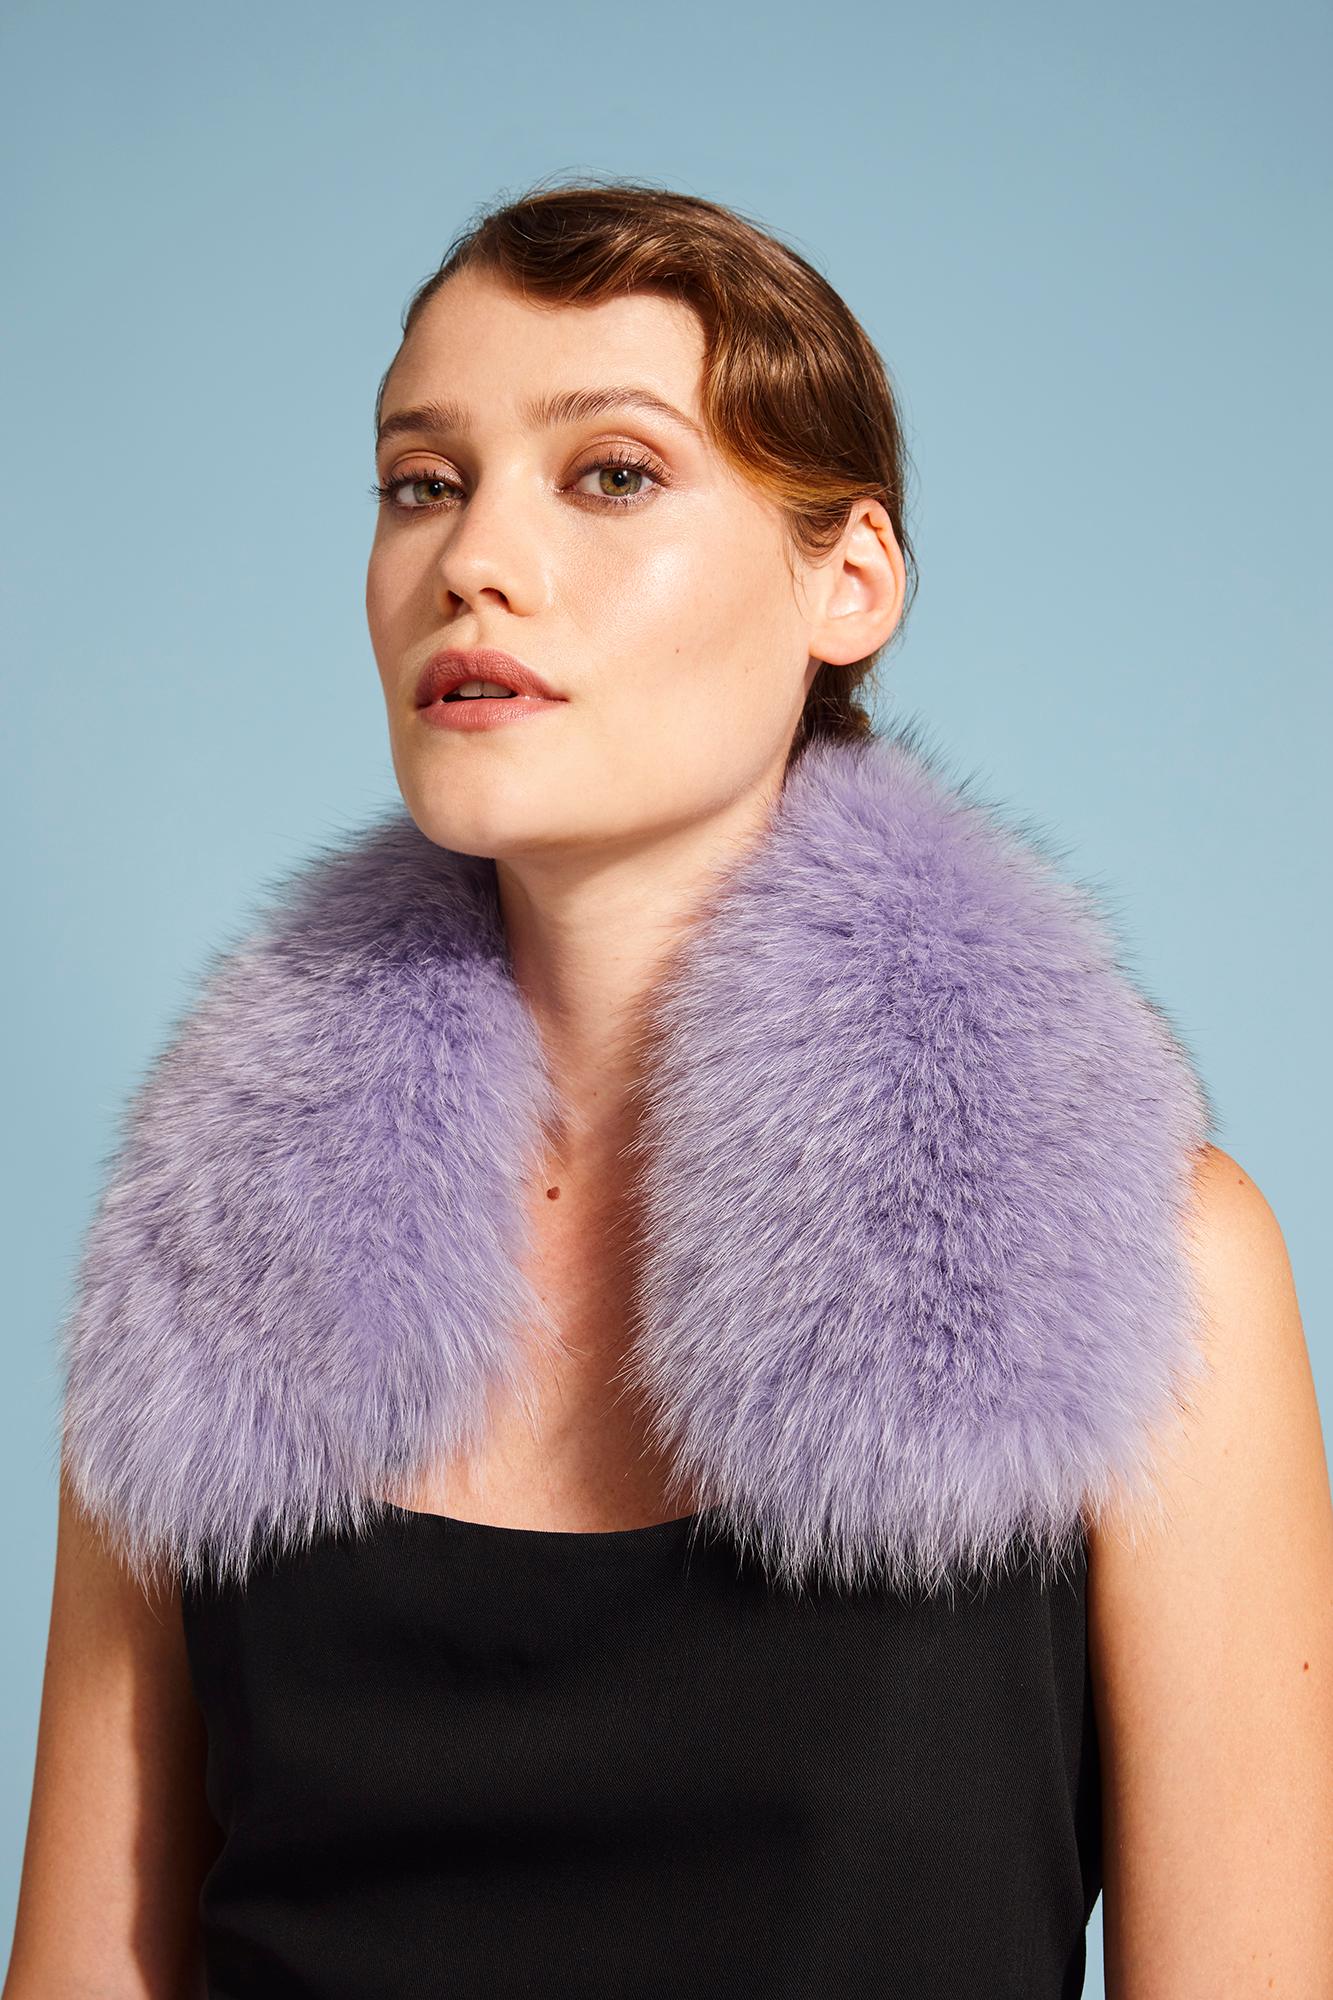 Verheyen London Peter Pan Collar in Lilac Fox Fur - Brand New  (RRP Price) 
The Peter Pan collar is Verheyen London’s classic staple for effortless style for casual wear.

To throw over your favourite knit or leather jacket.

PRODUCT DETAILS

The